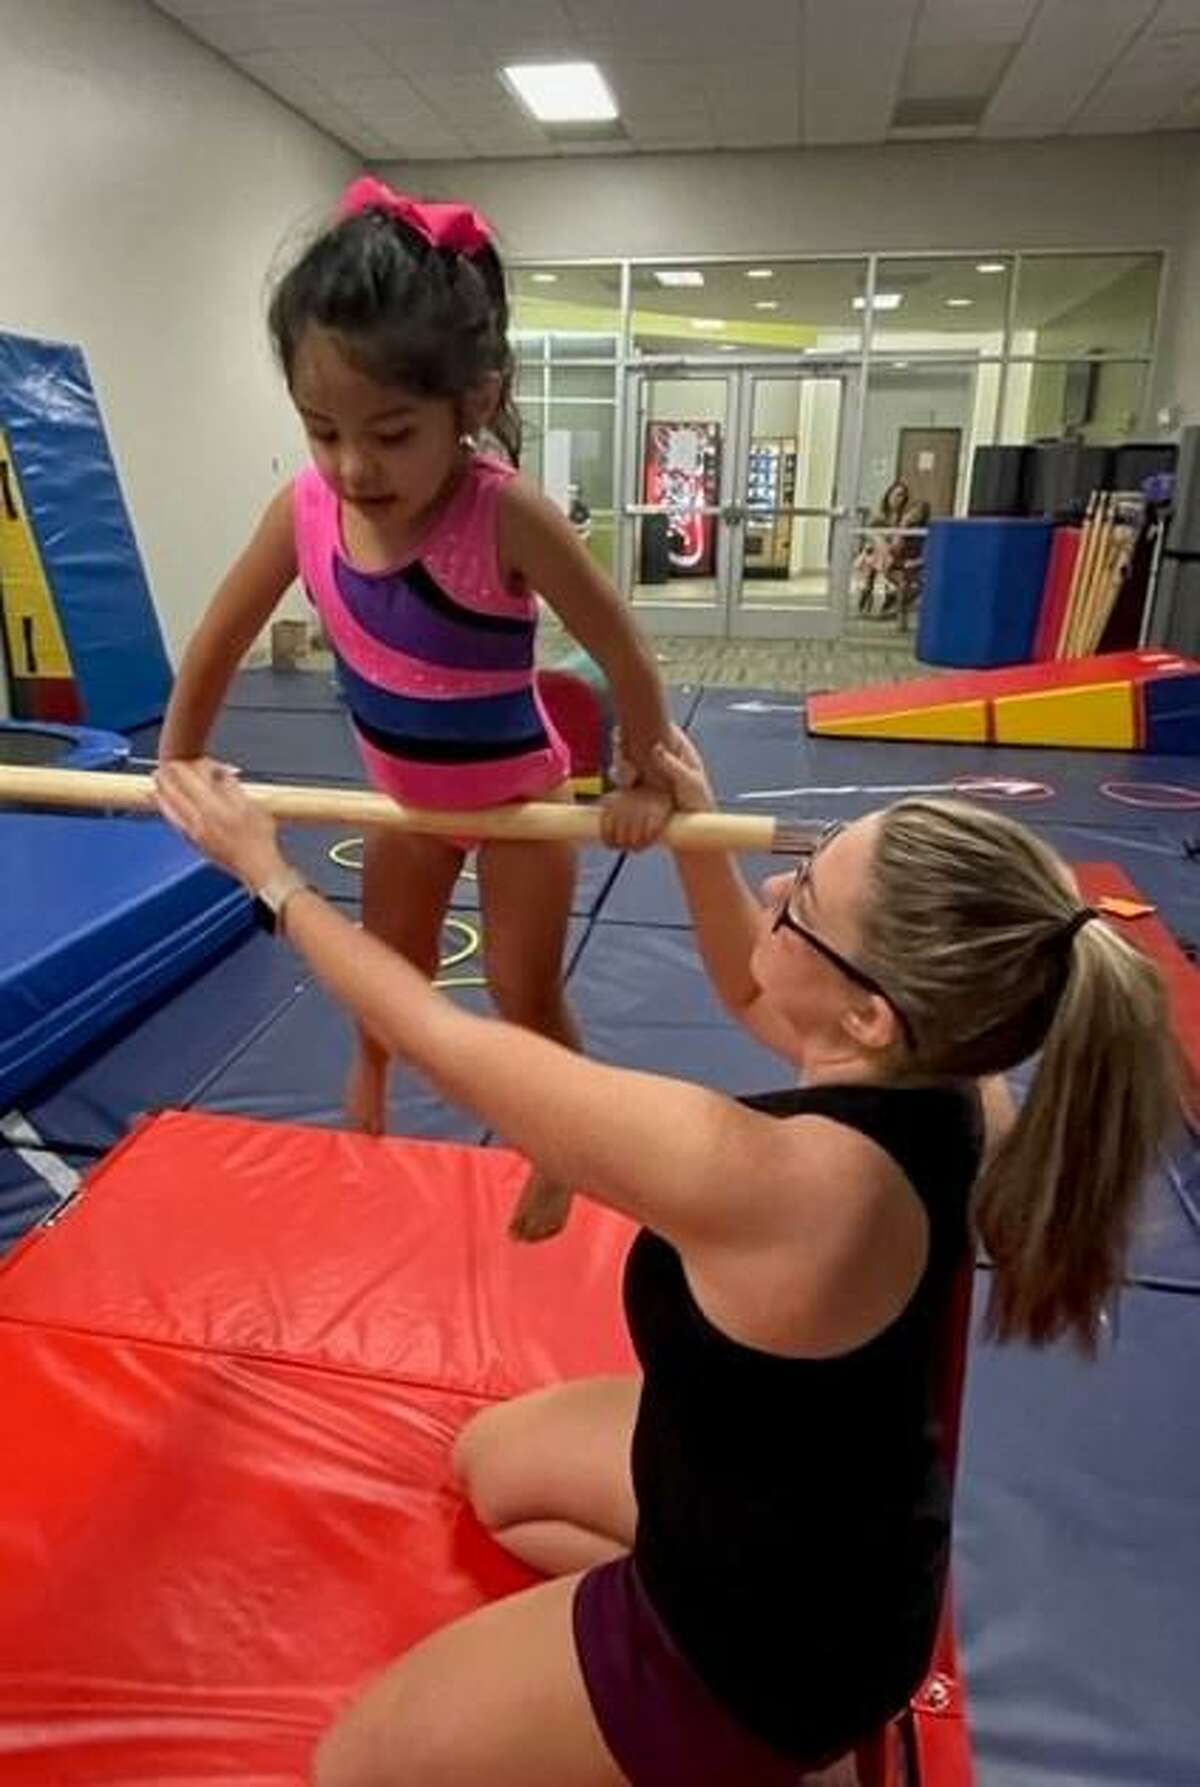 Youth Gymnastics registration is now open for Fall Session II classes at the C.K. Ray Recreation Center. Gymnastics classes are fun and a great way to improve a child’s coordination, flexibility, and strength. Beginner classes are offered for as young as 3 years old and more advanced classes are based on skill level 6 years and up. Contact the C.K. Ray Recreation Center at 936-522-3900 or online at cityofconroe.org for more information.